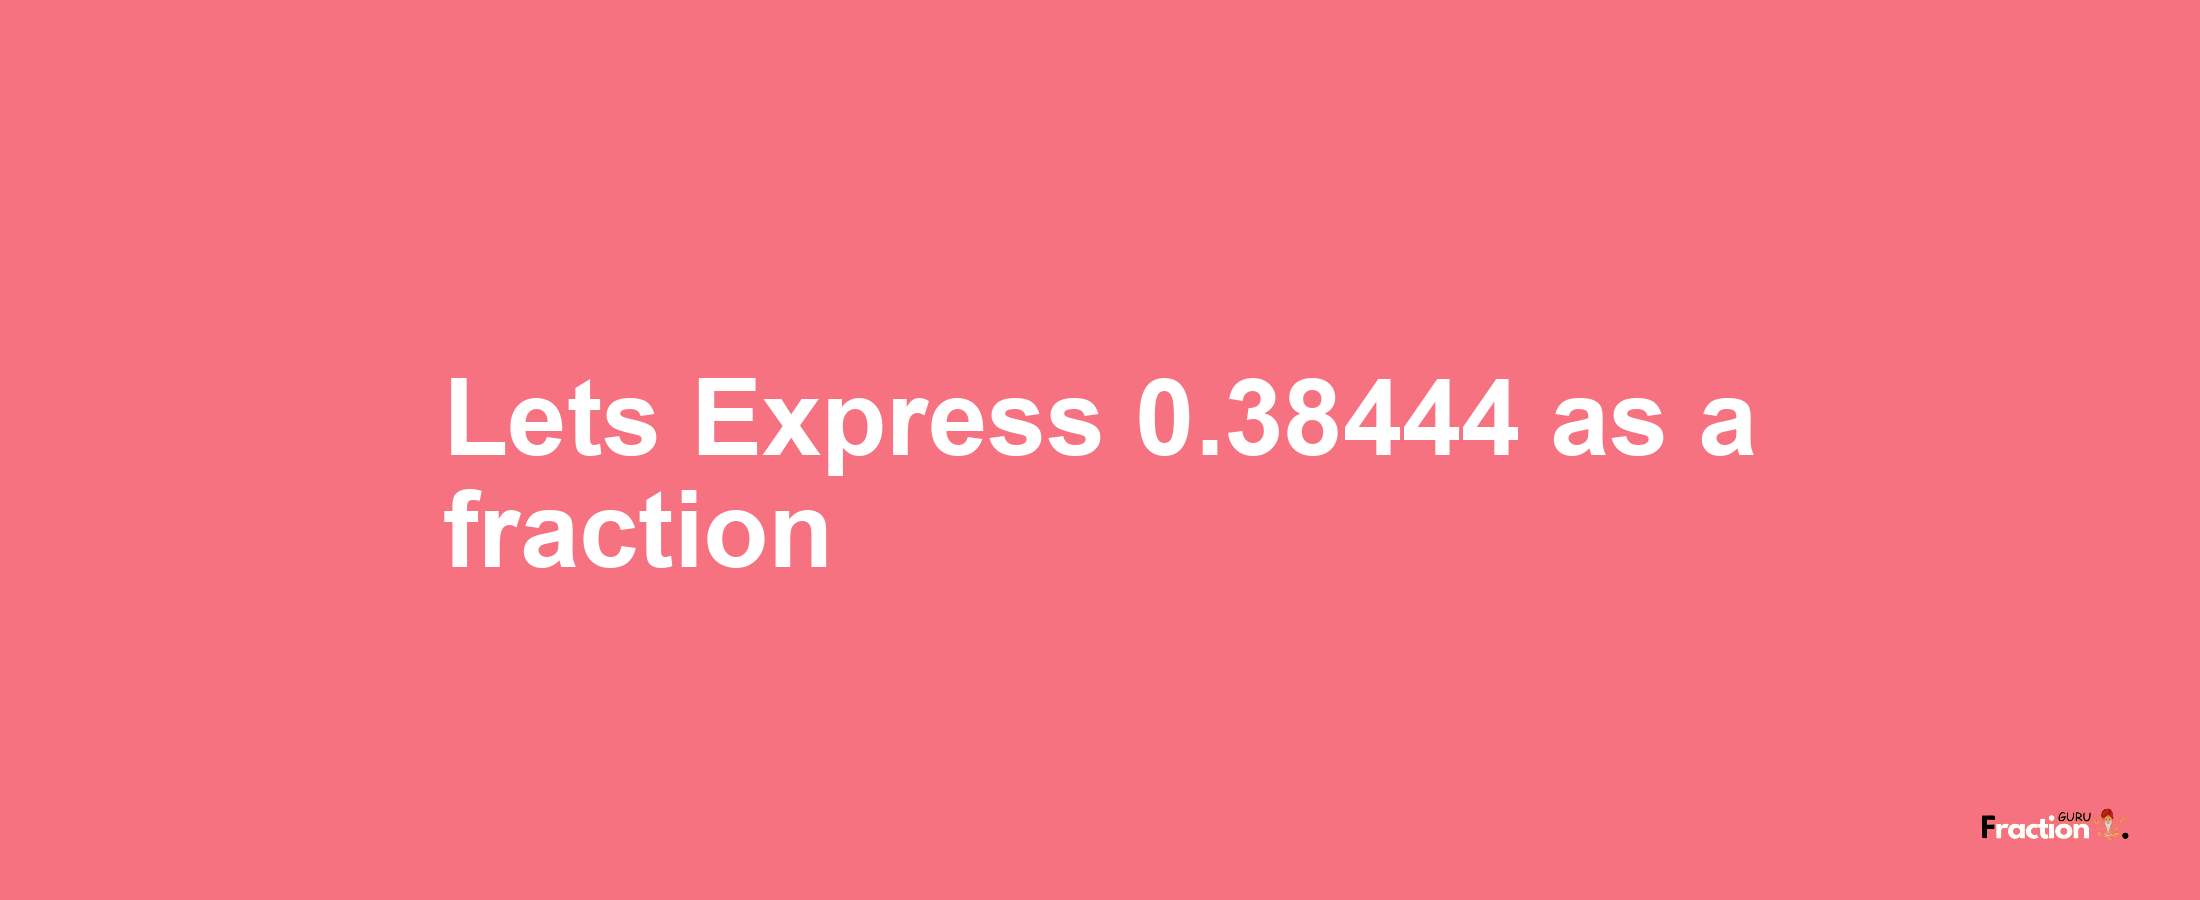 Lets Express 0.38444 as afraction